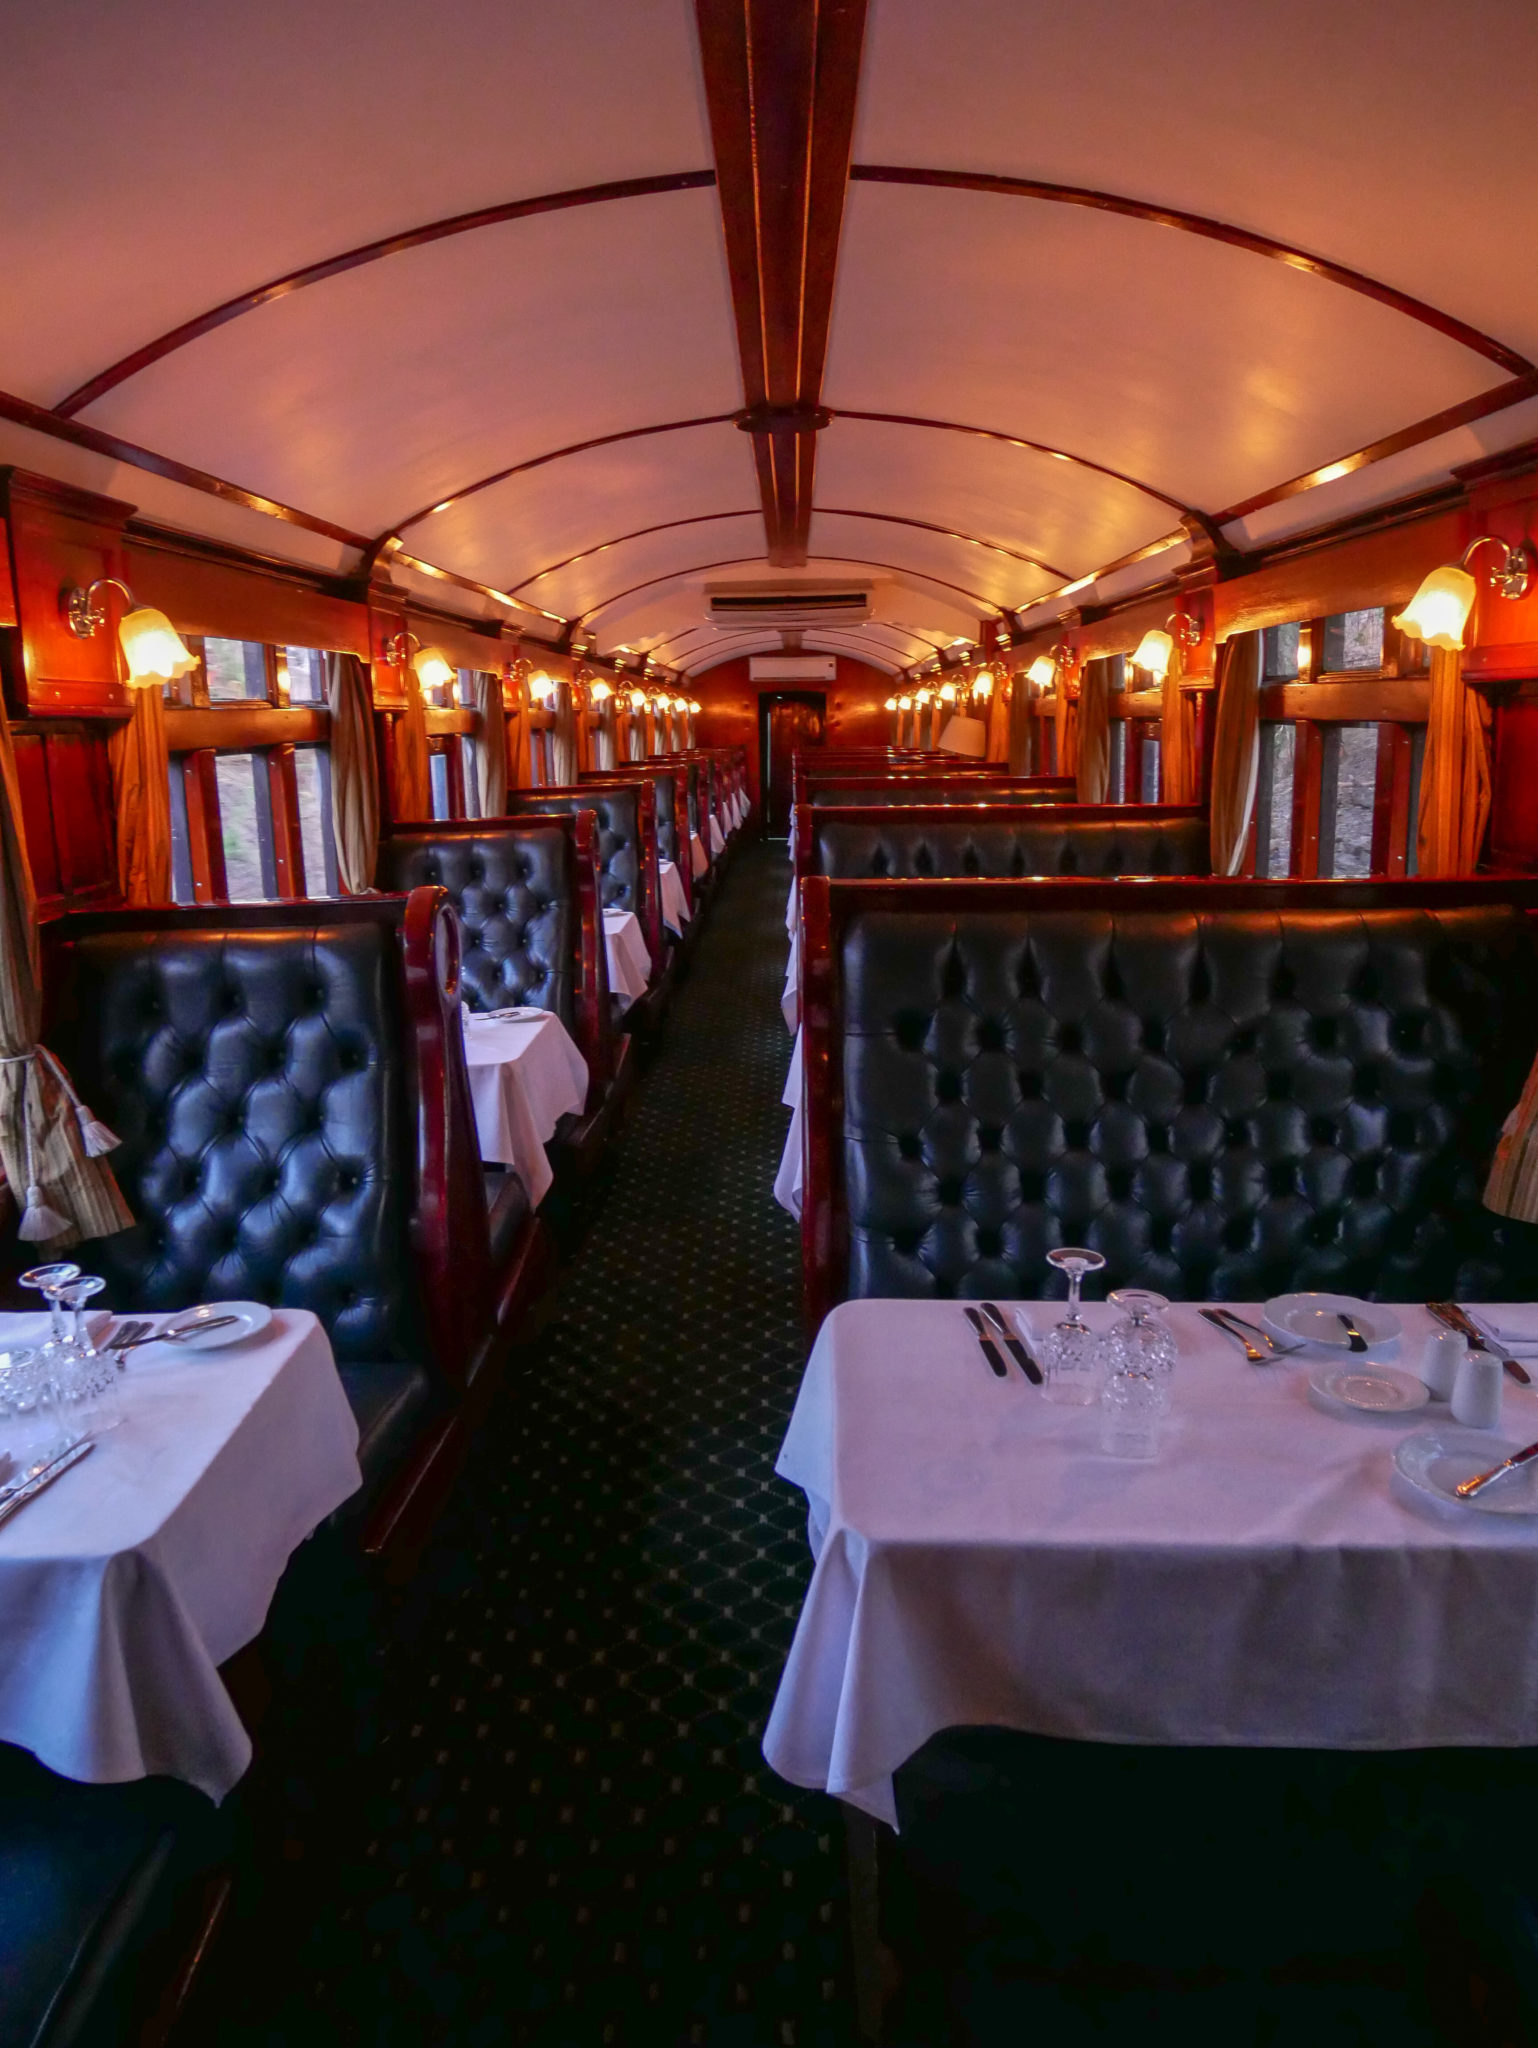 Tall black leather seats and white tablecloths in the Dining Car of the Royal Livingstone Express train